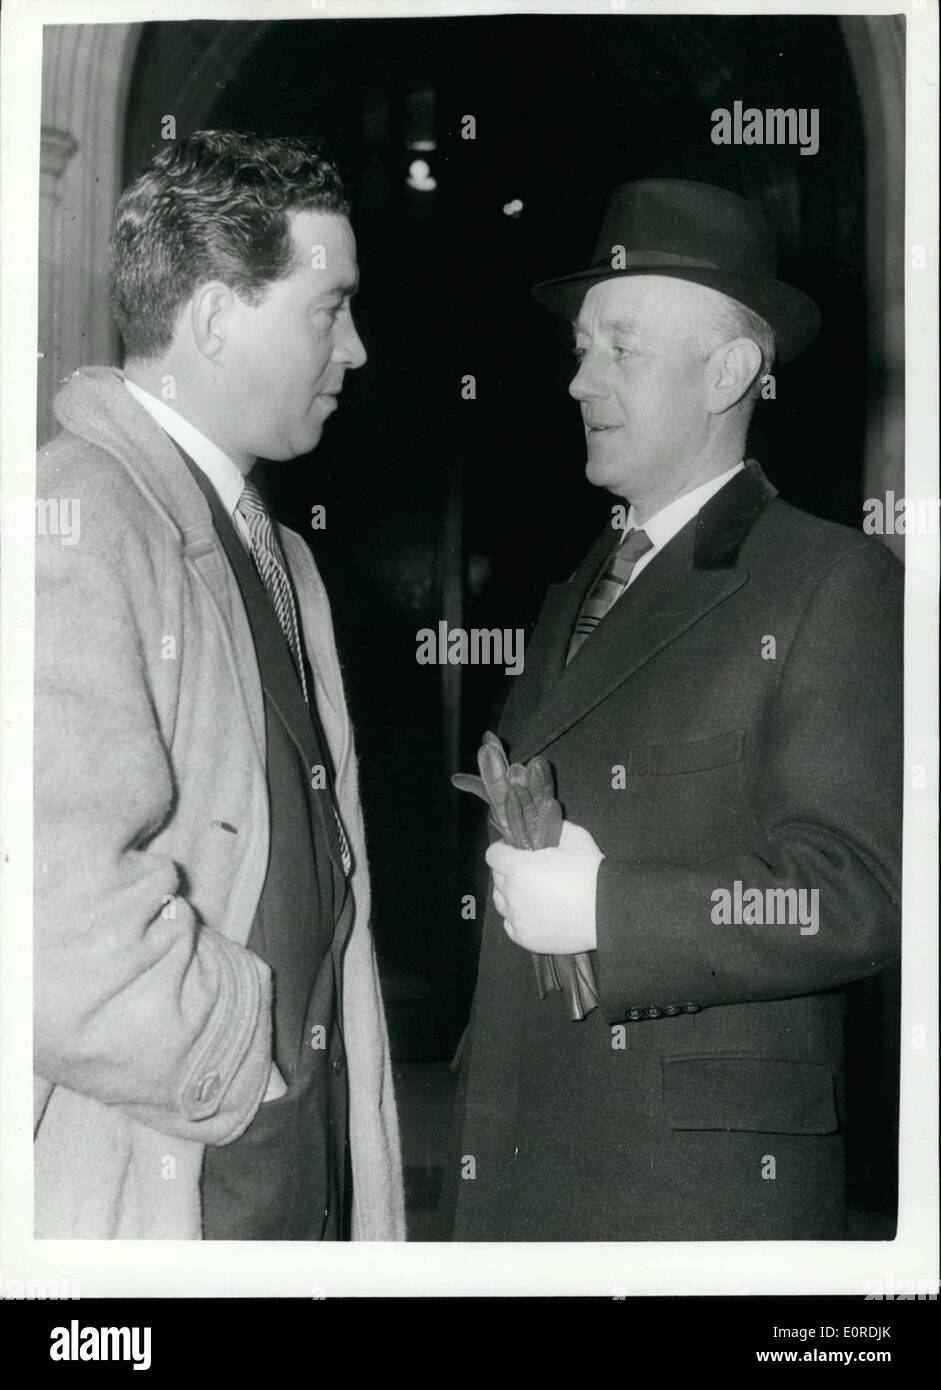 Feb. 02, 1959 - Film Stars Attend All Party Meeting Of M.P.'S: A group of leading British film stars, this afternoon attended an All Party Meeting of Members of Parliament in the House of Commons to ask M.P,'s pass for the abolition of Cinema Tax. Phot Shows Sir Alec Guinness, who led the delegation, with John Gregson, at the House of Commons this afternoon. Stock Photo